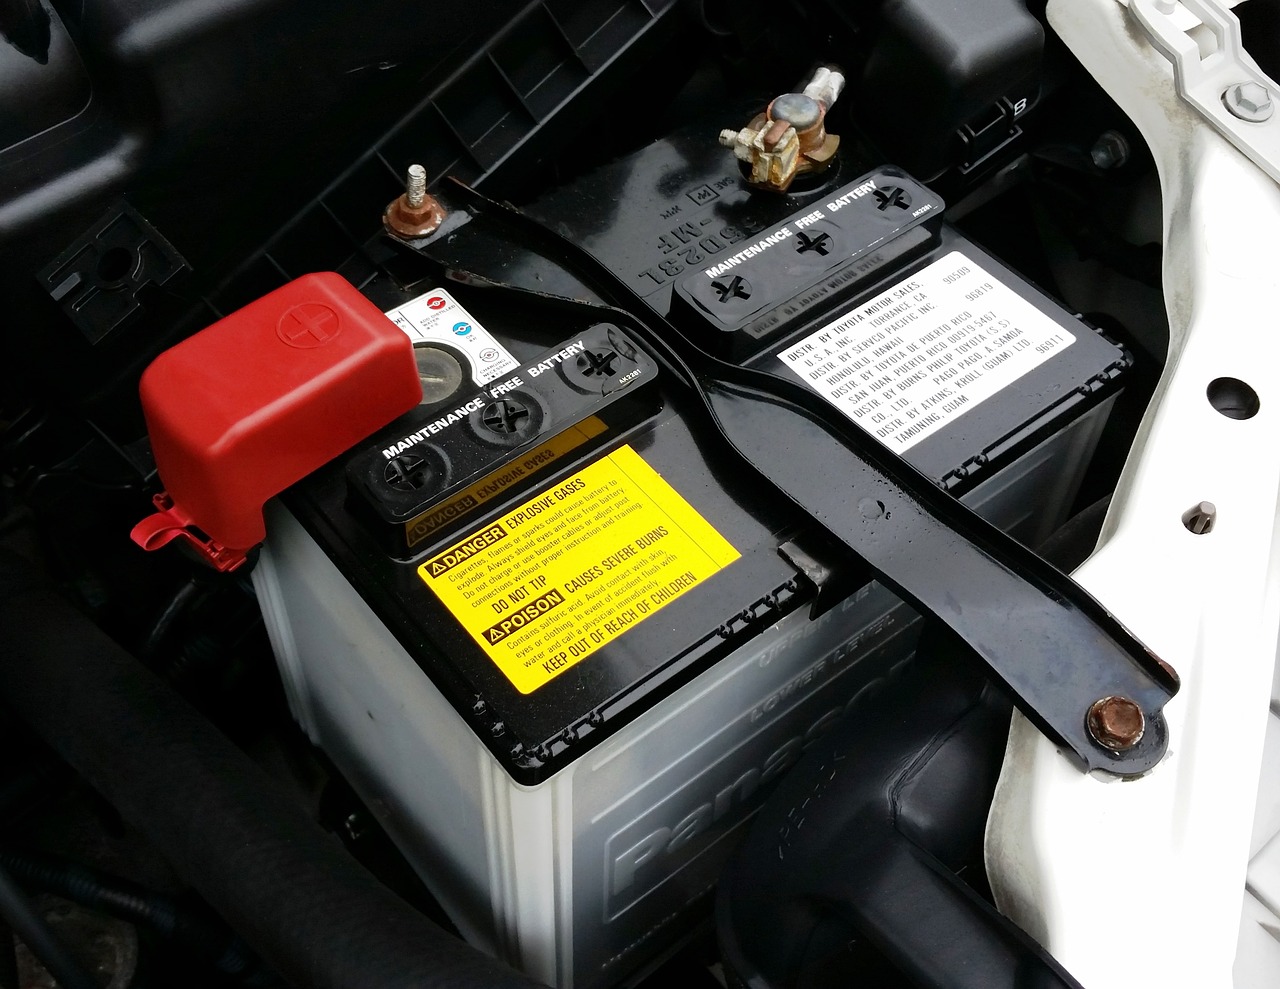 how to use a midtronics battery tester manual